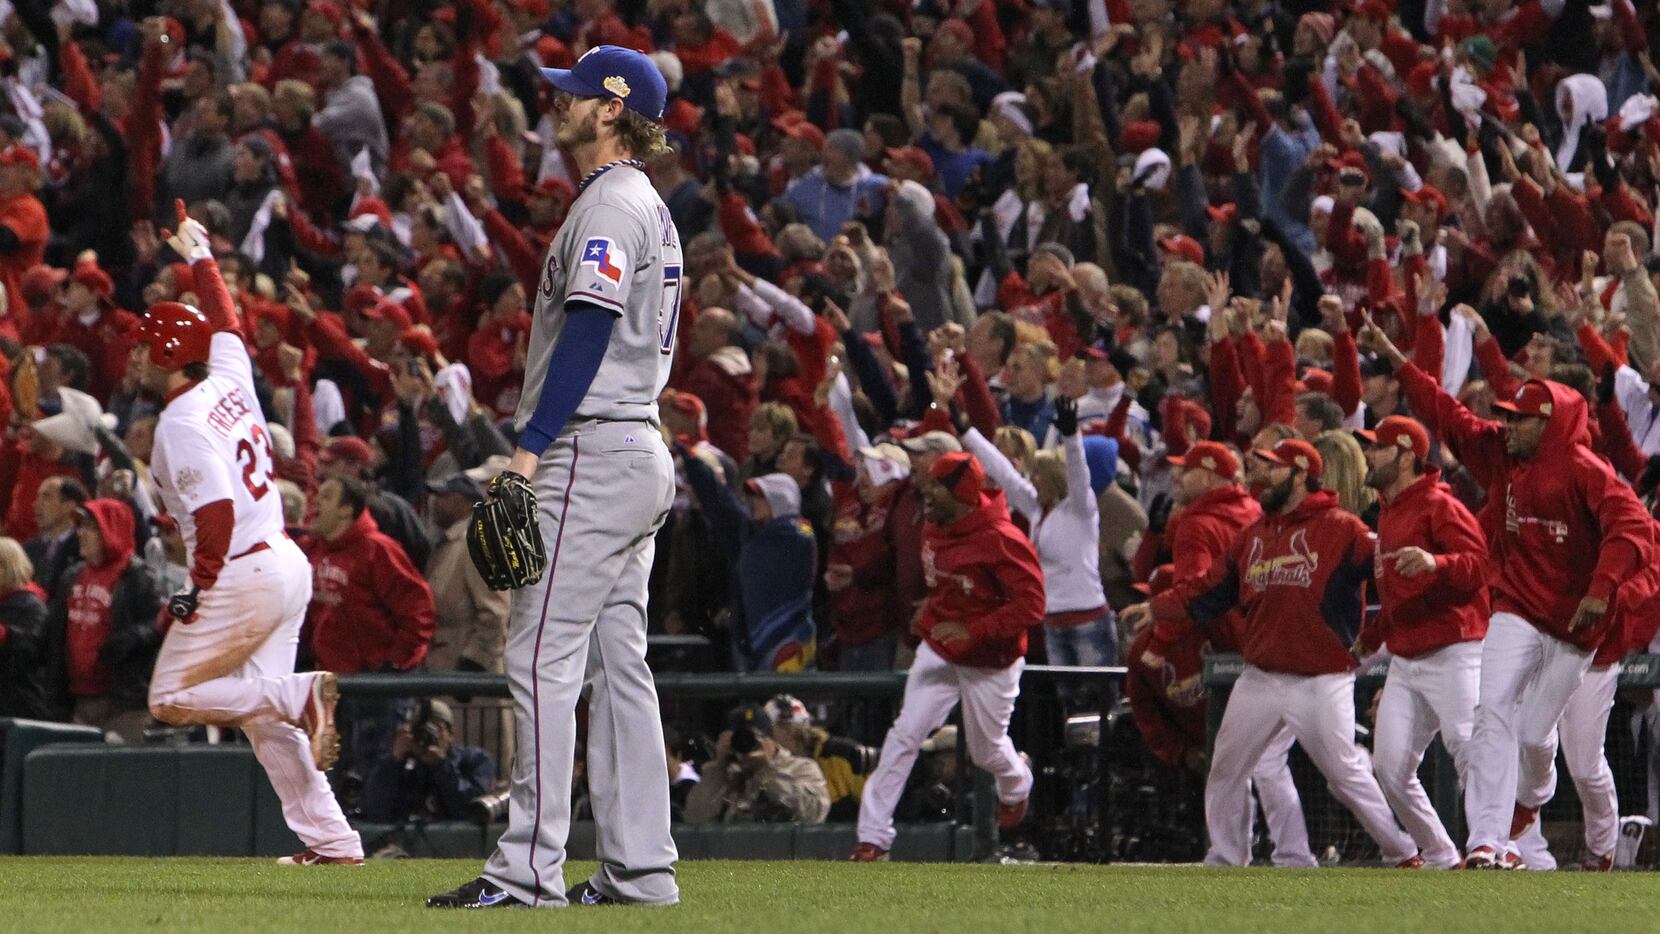 2011 WS Game 6: Freese leads Cardinals comeback 